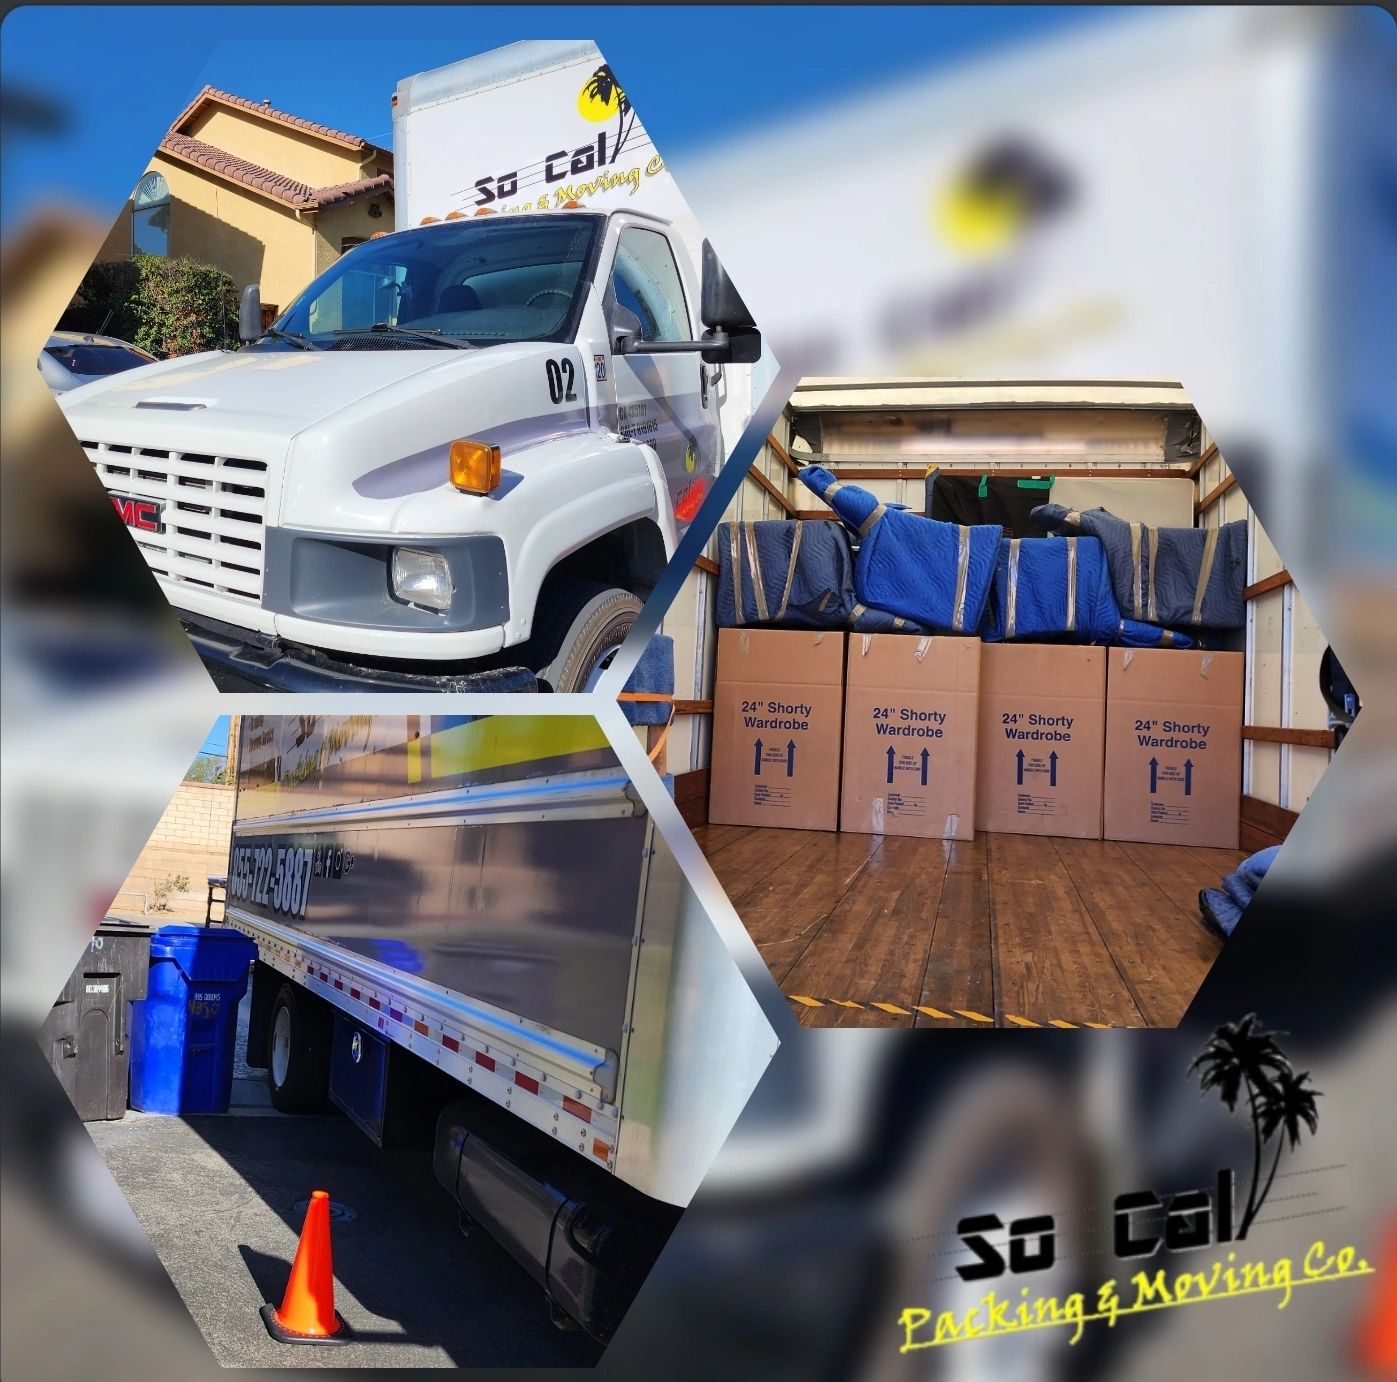 Moreno Valley moving company truck that services Riverside, Rancho Cucamonga, Beaumont, Menifee, 